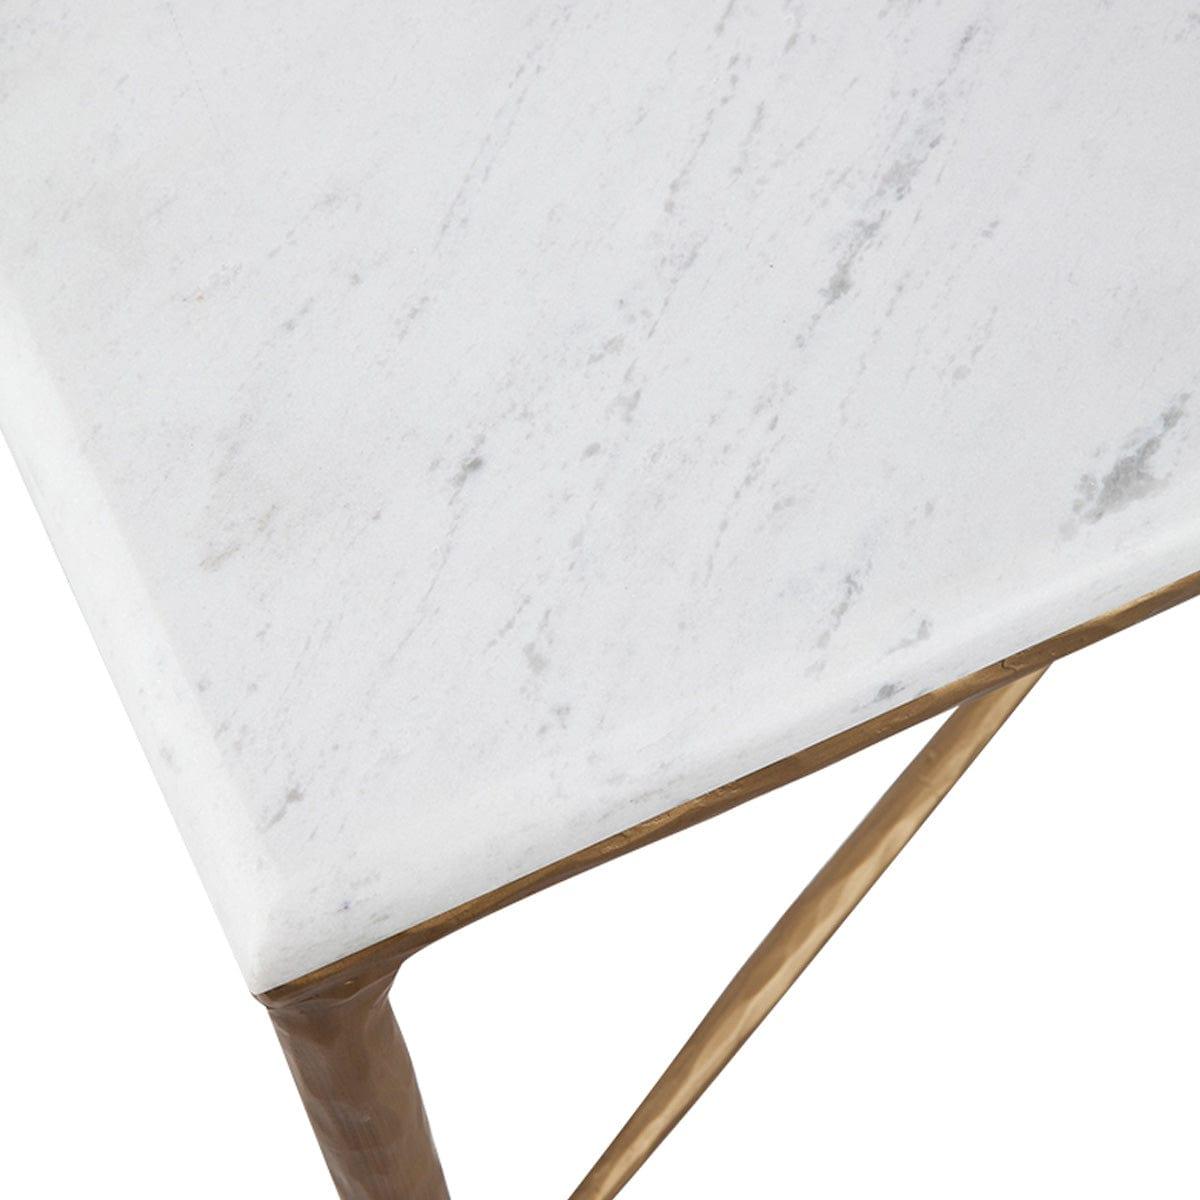 House Journey Heston Rectangle Marble Coffee Table - Brass